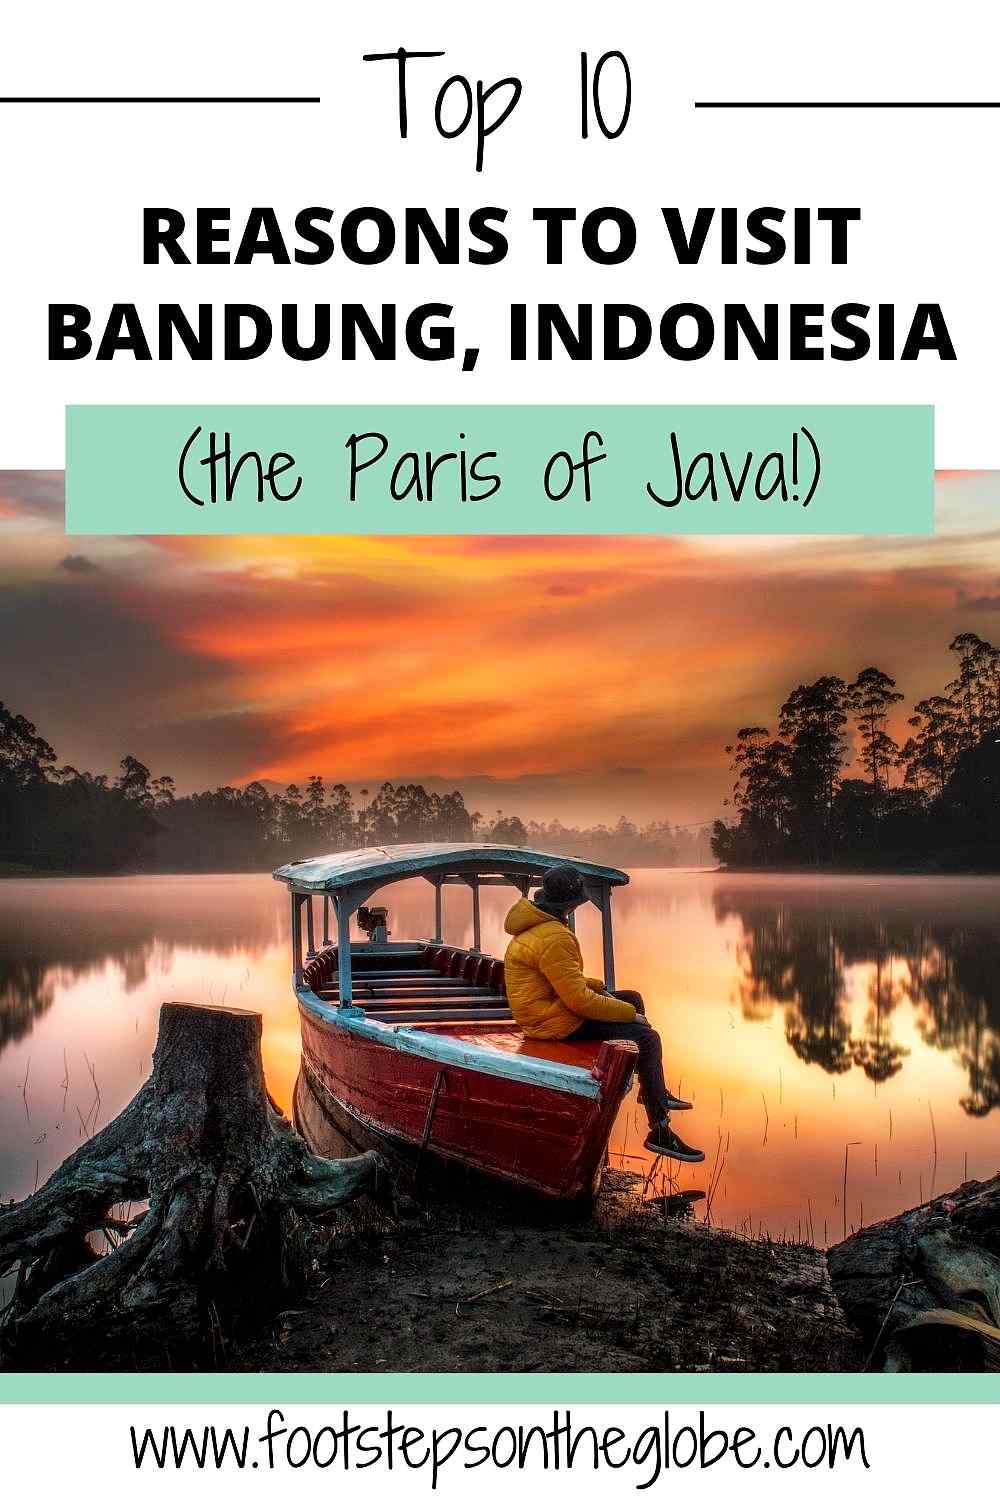 Pinterest image of a man watching a sunset from a boat in Bandung, Indonesia with the text: "Top 10 reasons to visit Bandung, Indonesia (the Paris of Java!)"